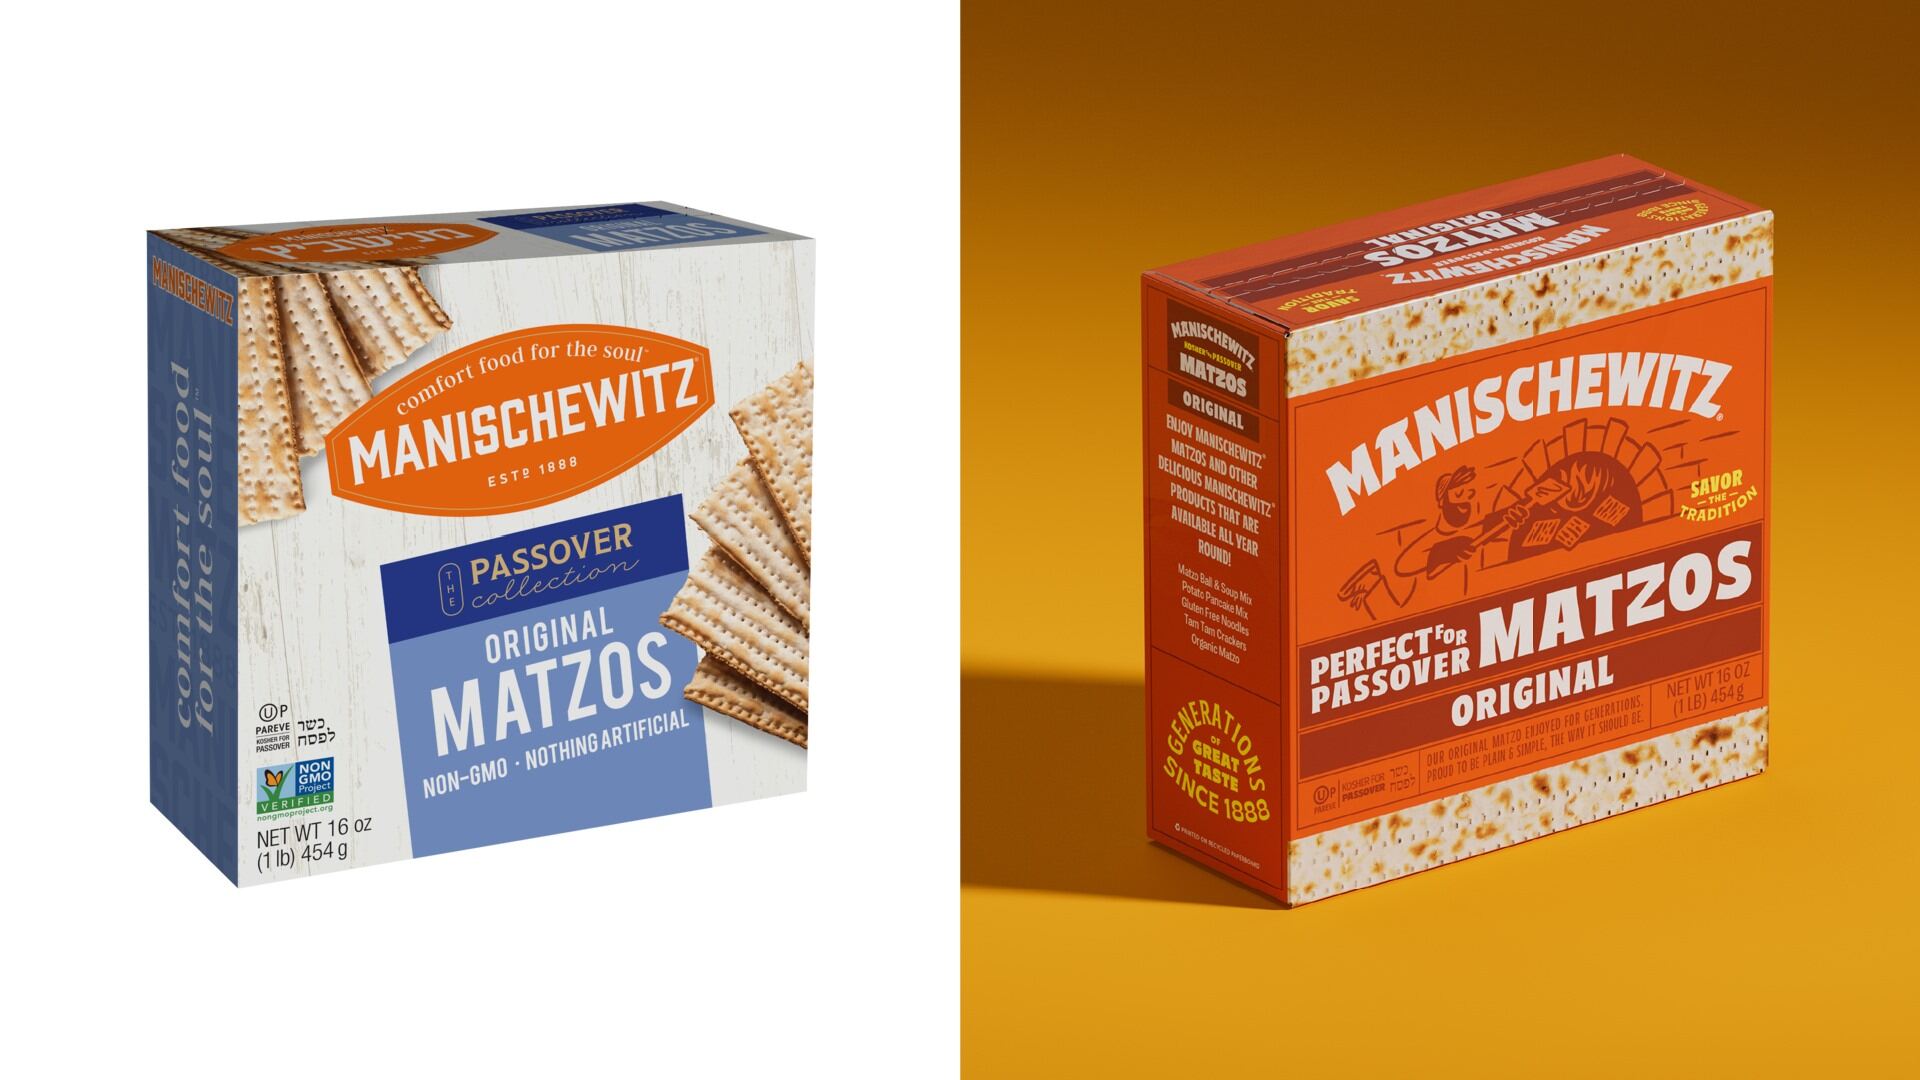 A fifth question this Passover: Why does that Manichewitz matzah box look so different?